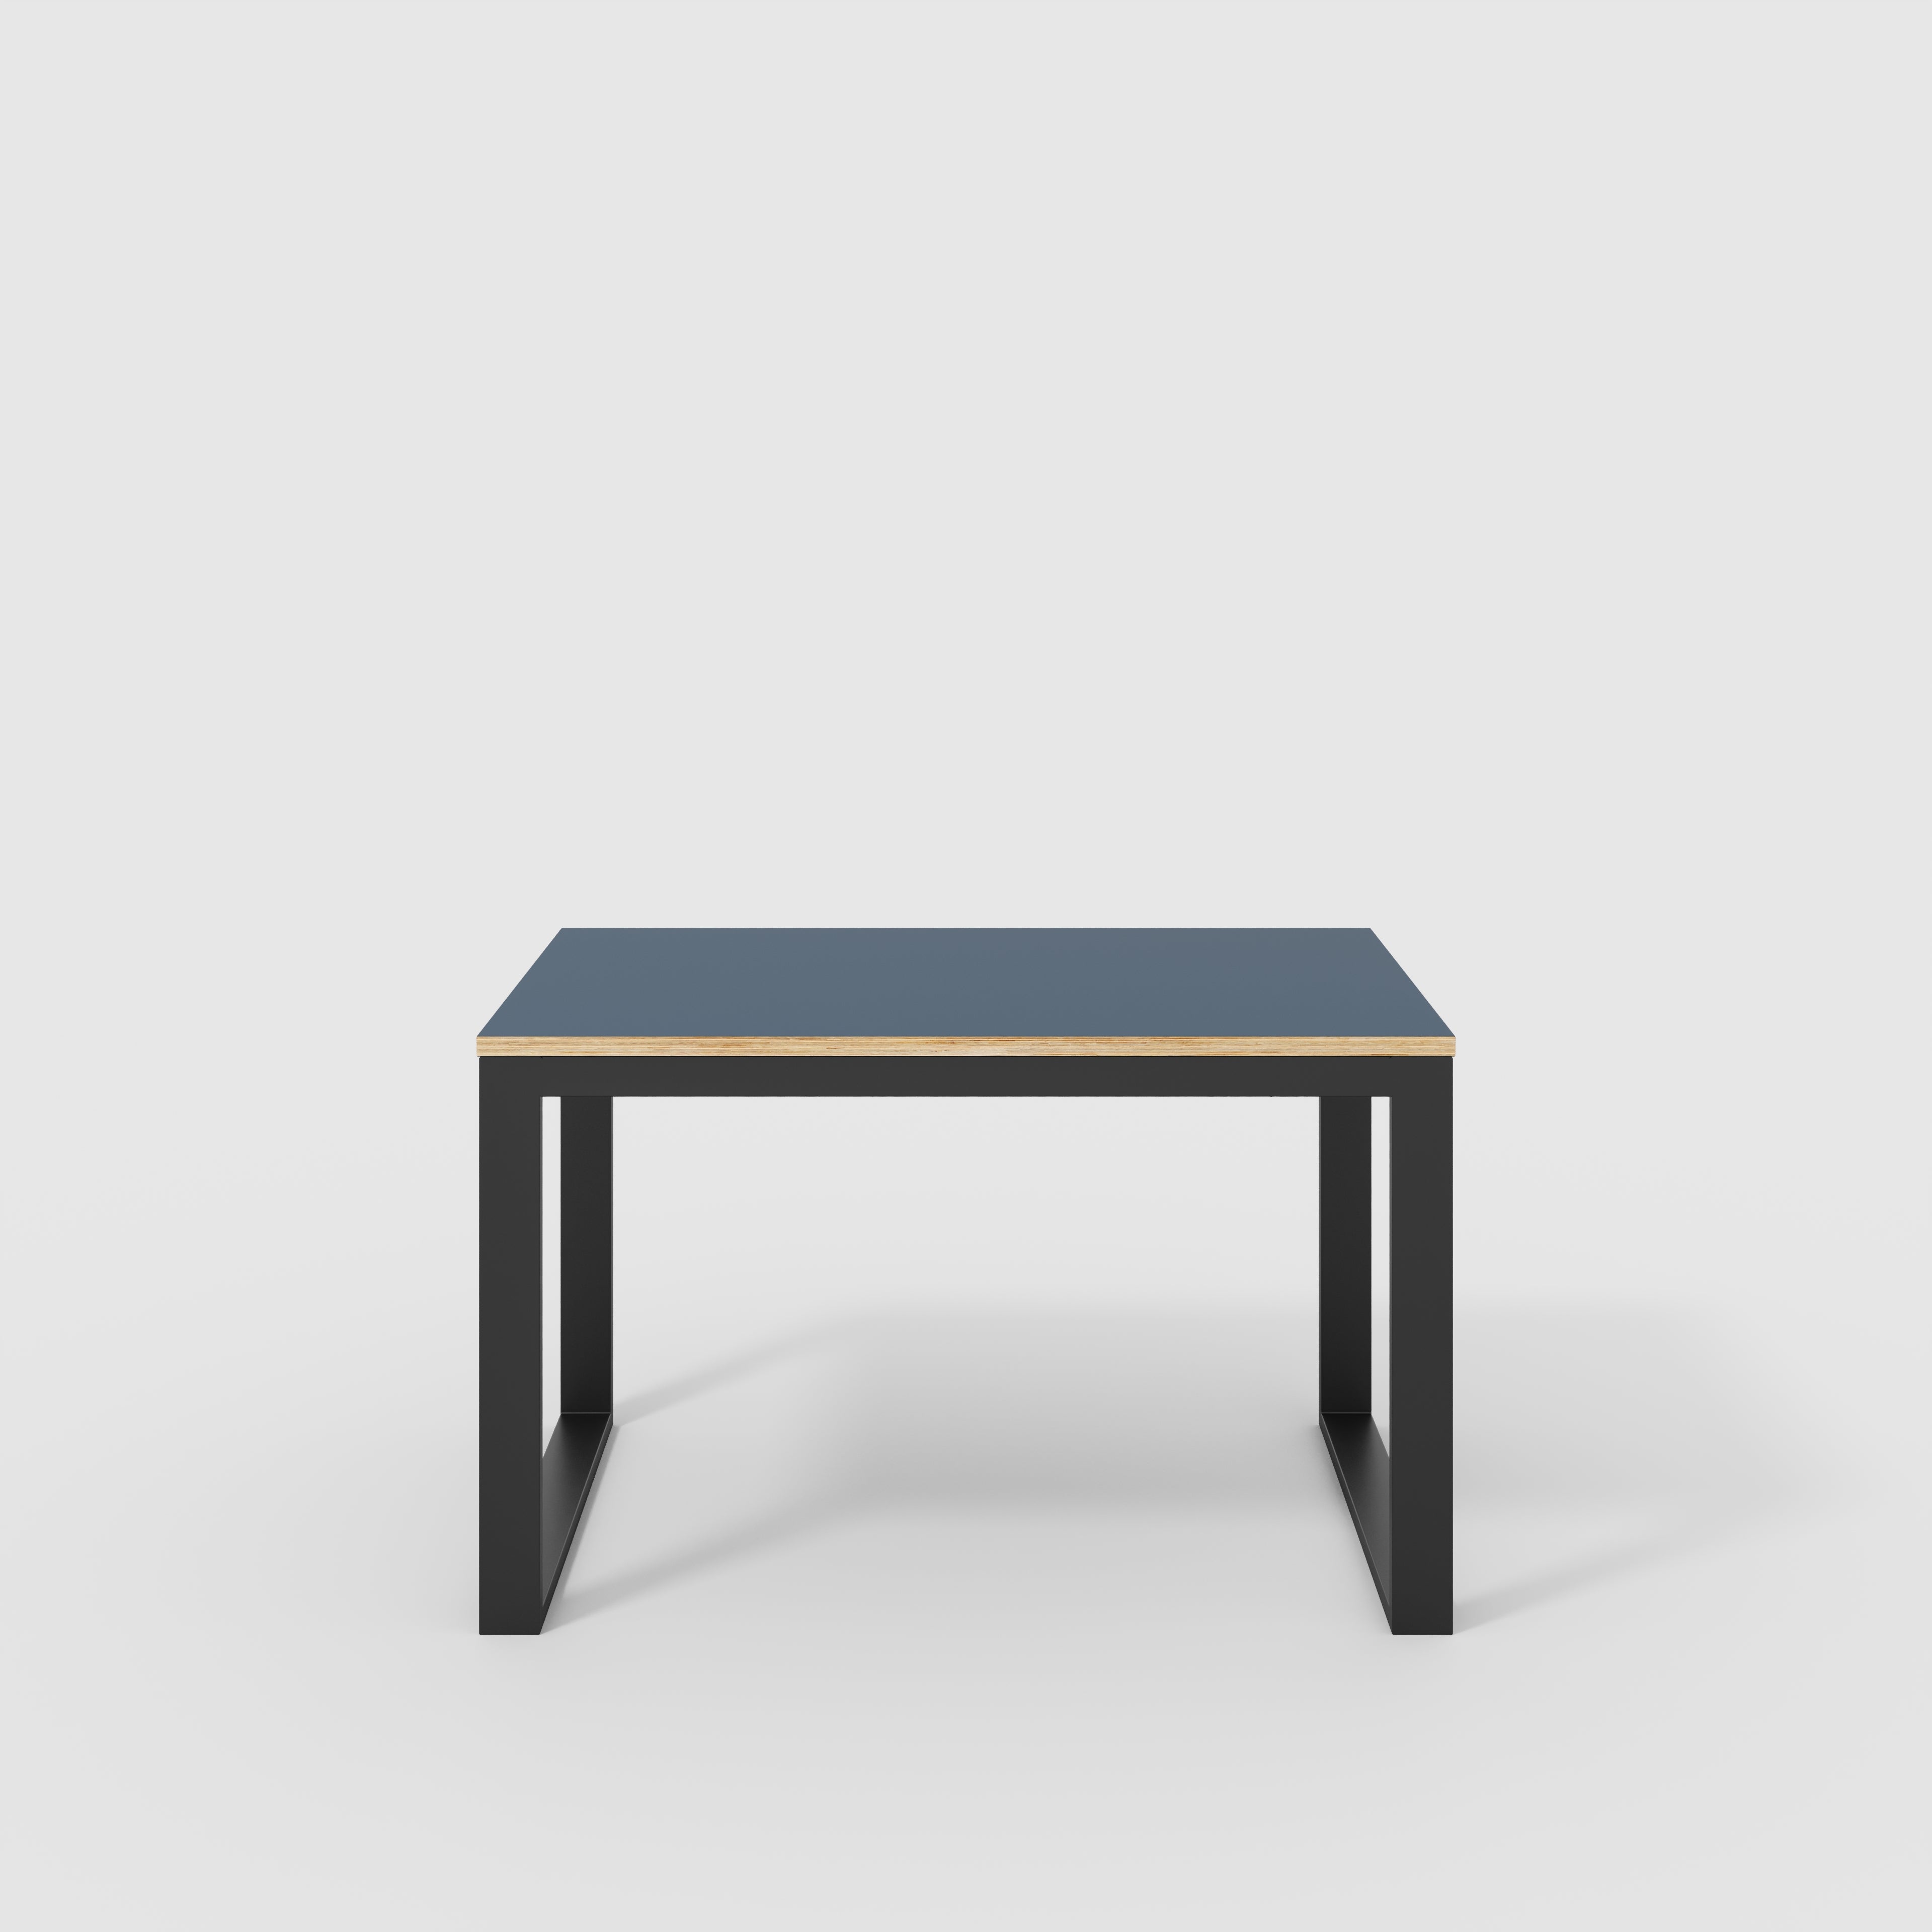 Table with Black Industrial Frame - Formica Night Sea Blue - 1200(w) x 745(d) x 735(h)